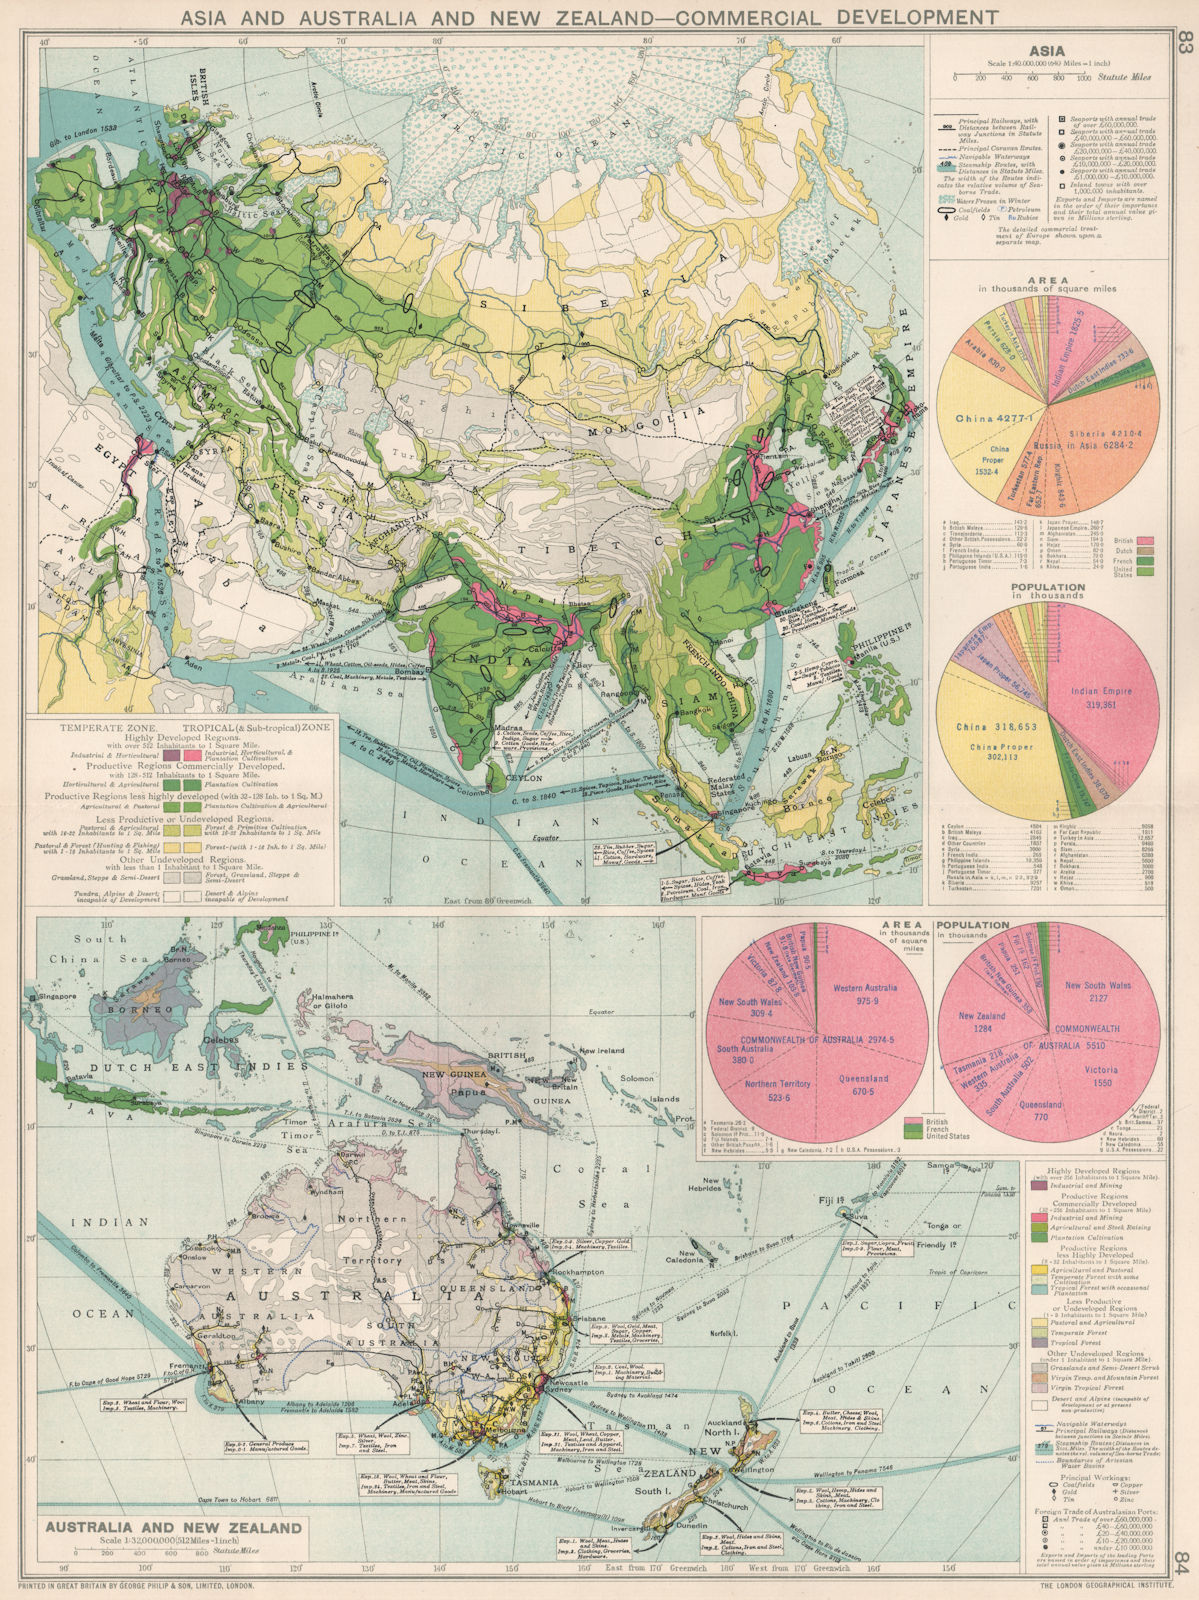 Asia, Australia & New Zealand. Commercial. Import & export routes 1925 old map